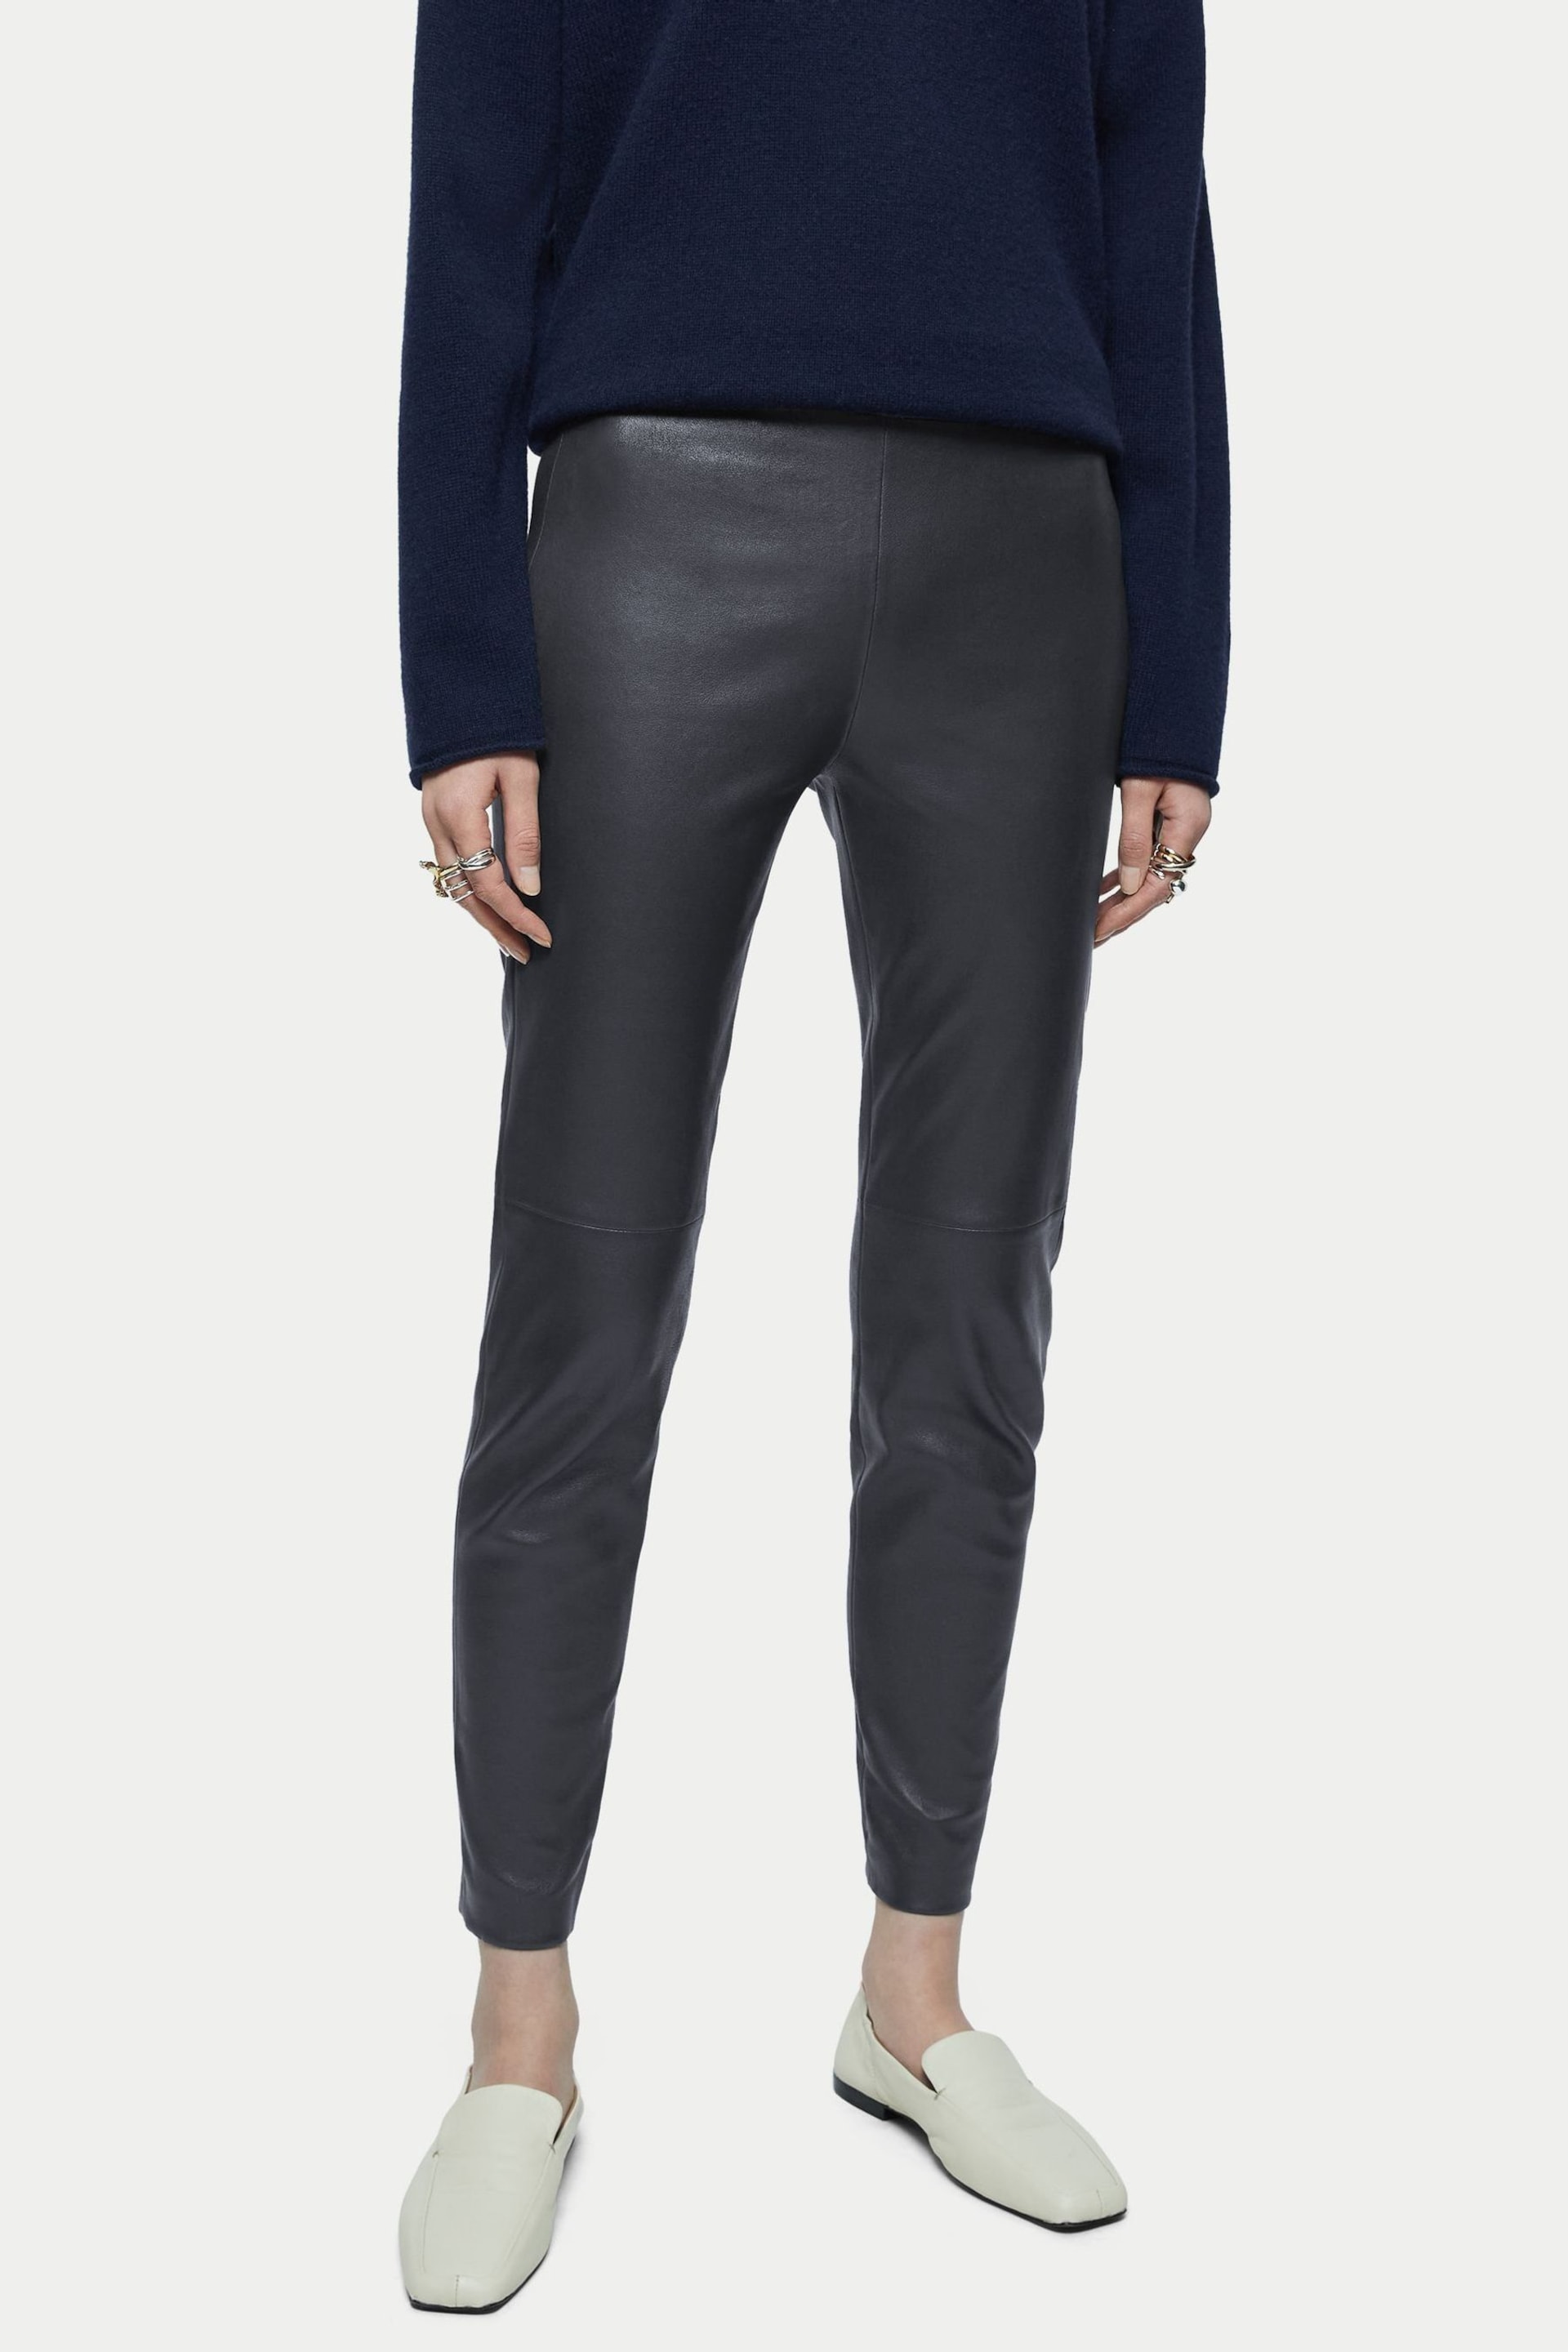 Jigsaw Blue Stretch Leather Leggings - Image 1 of 4